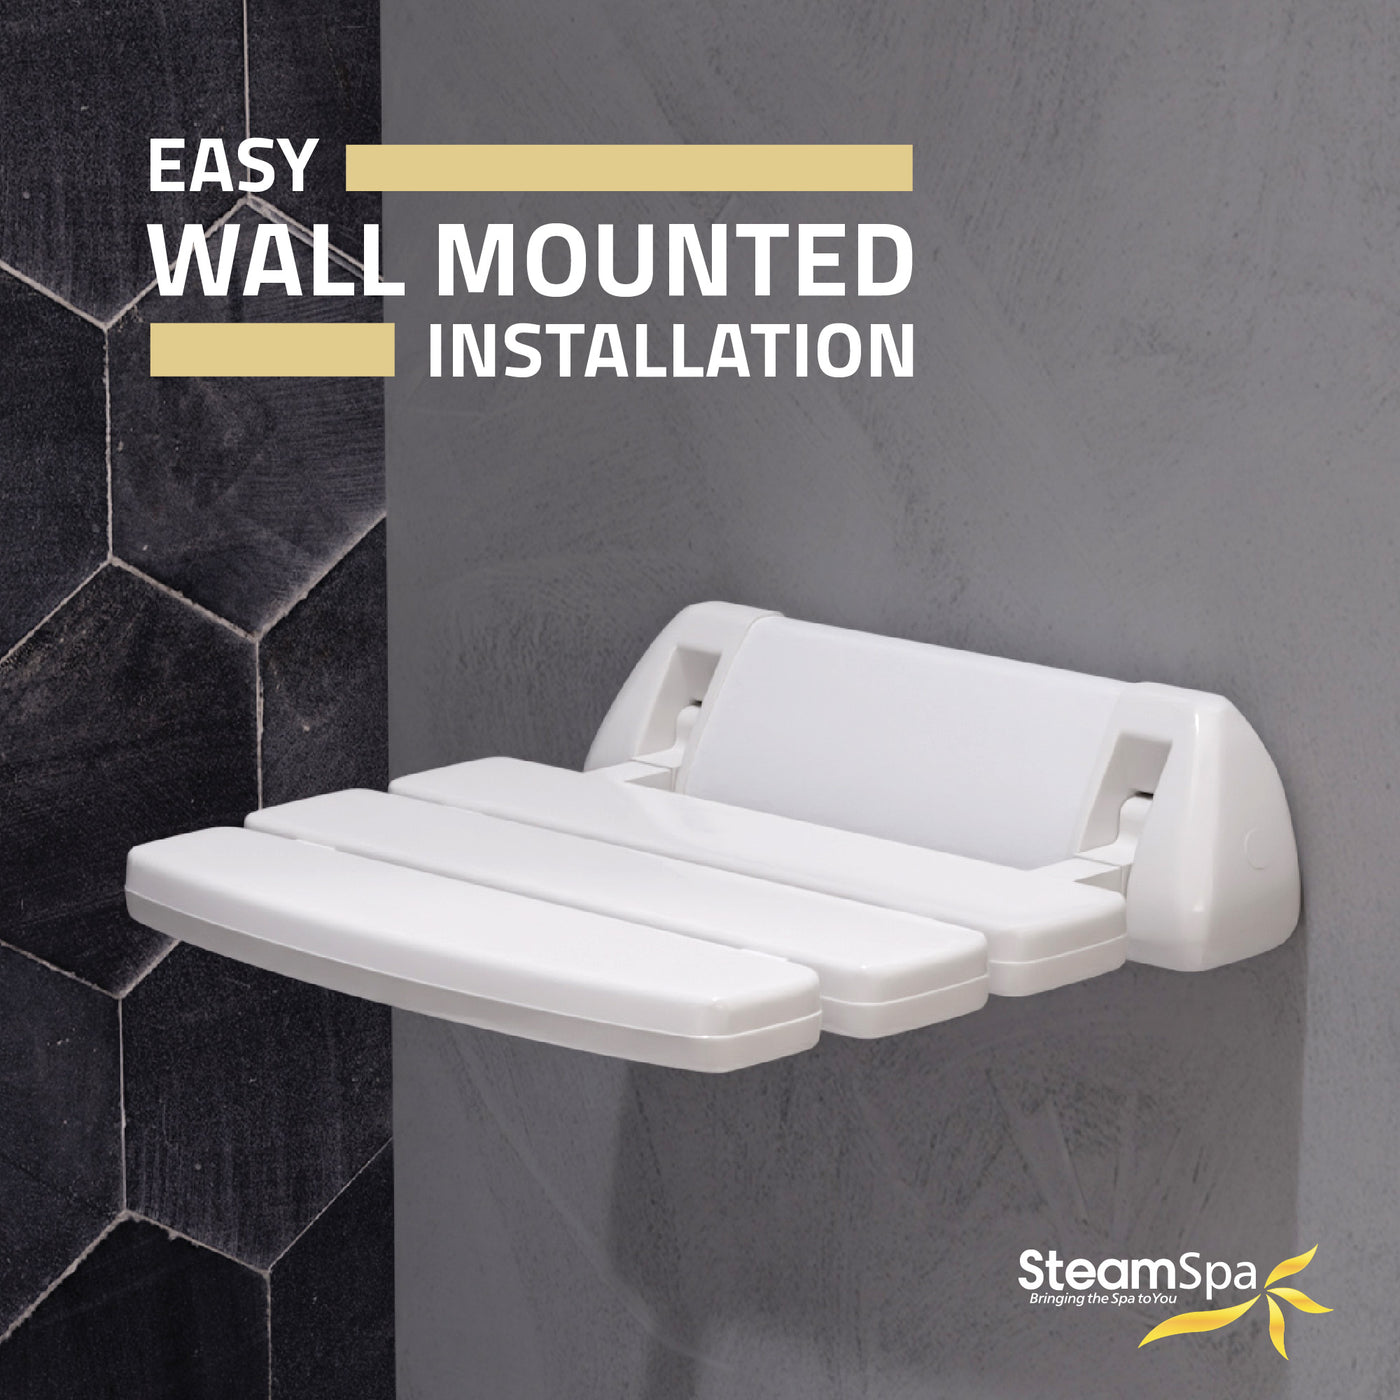 Class 13.78 in. Wall Mounted Folding Shower Seat SSP-SS-C